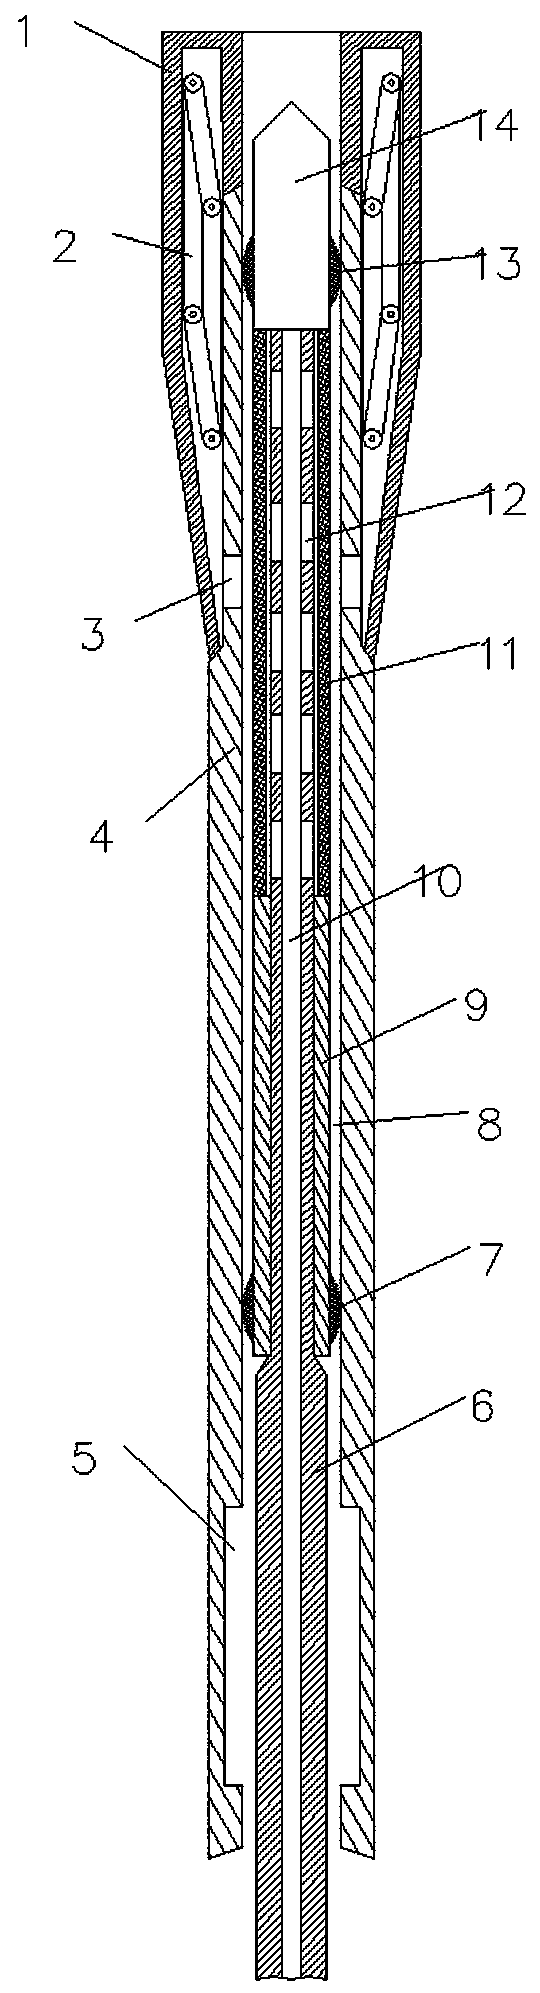 Thrombus-removaldredging device for medical surgery